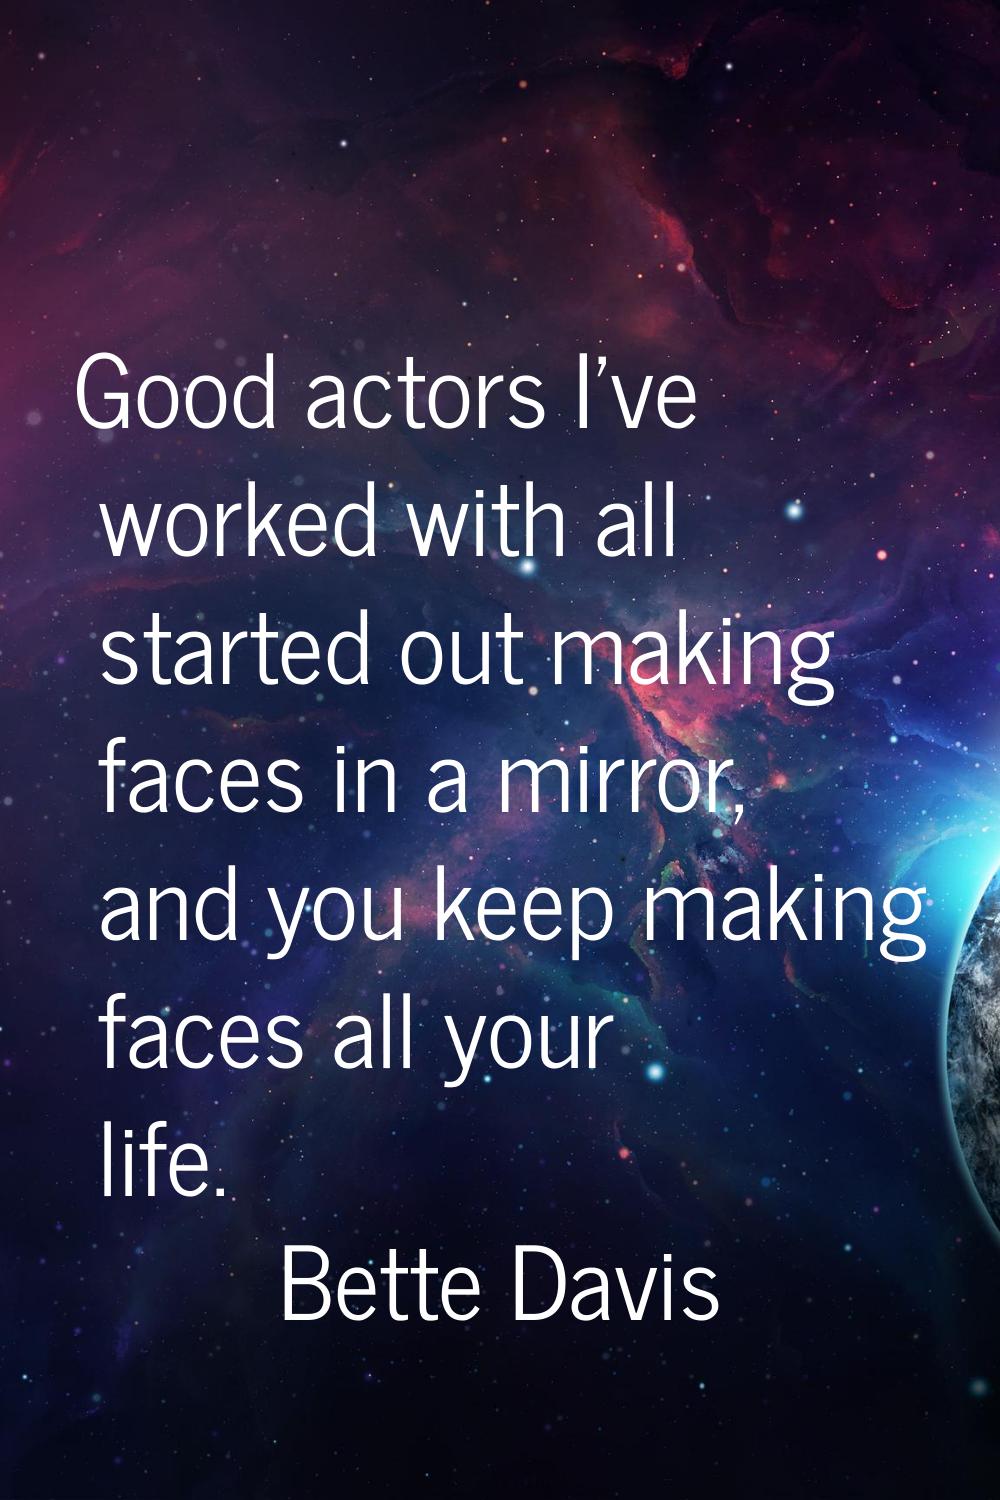 Good actors I've worked with all started out making faces in a mirror, and you keep making faces al